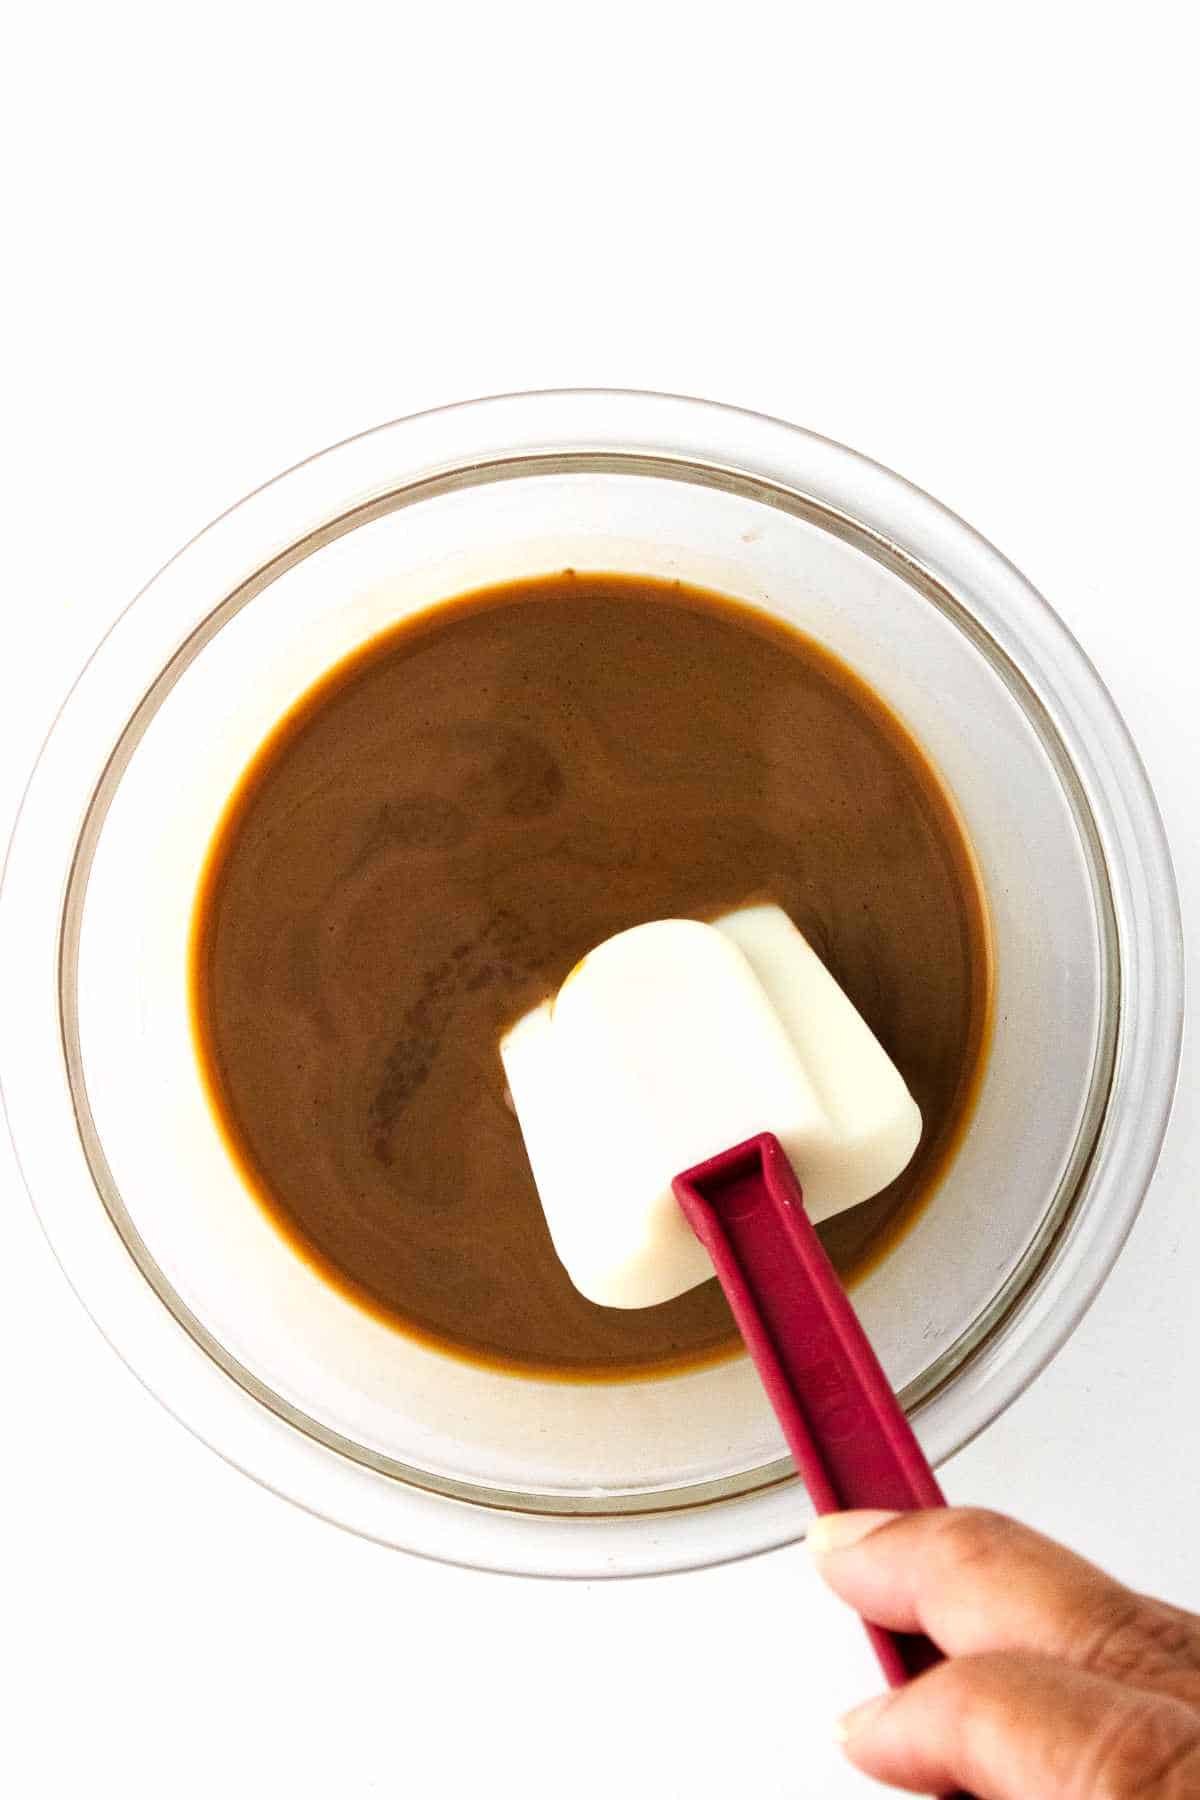 clear glass bowl with white spatula stirring irish cream into melted chocolate.